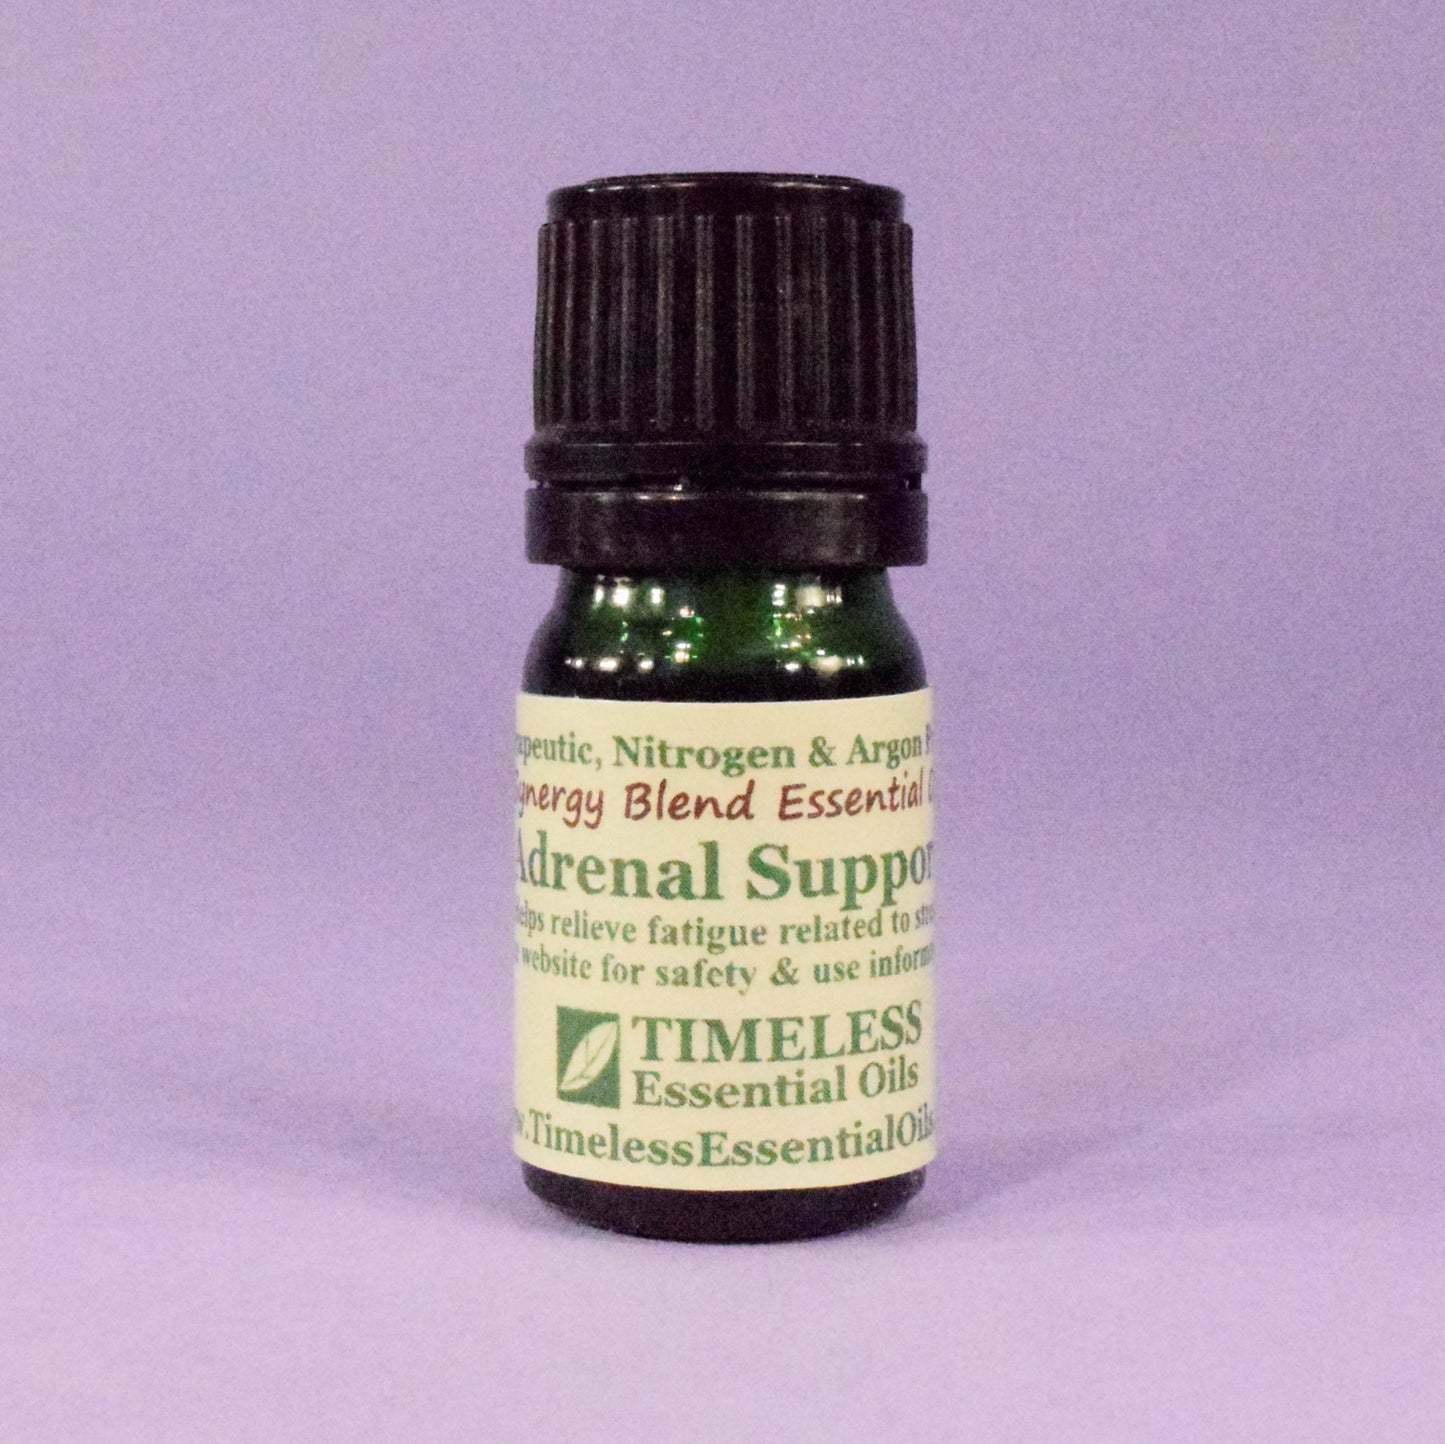 TIMELESS Adrenal Support Synergy Blend helps relieve fatigue related to stress.  